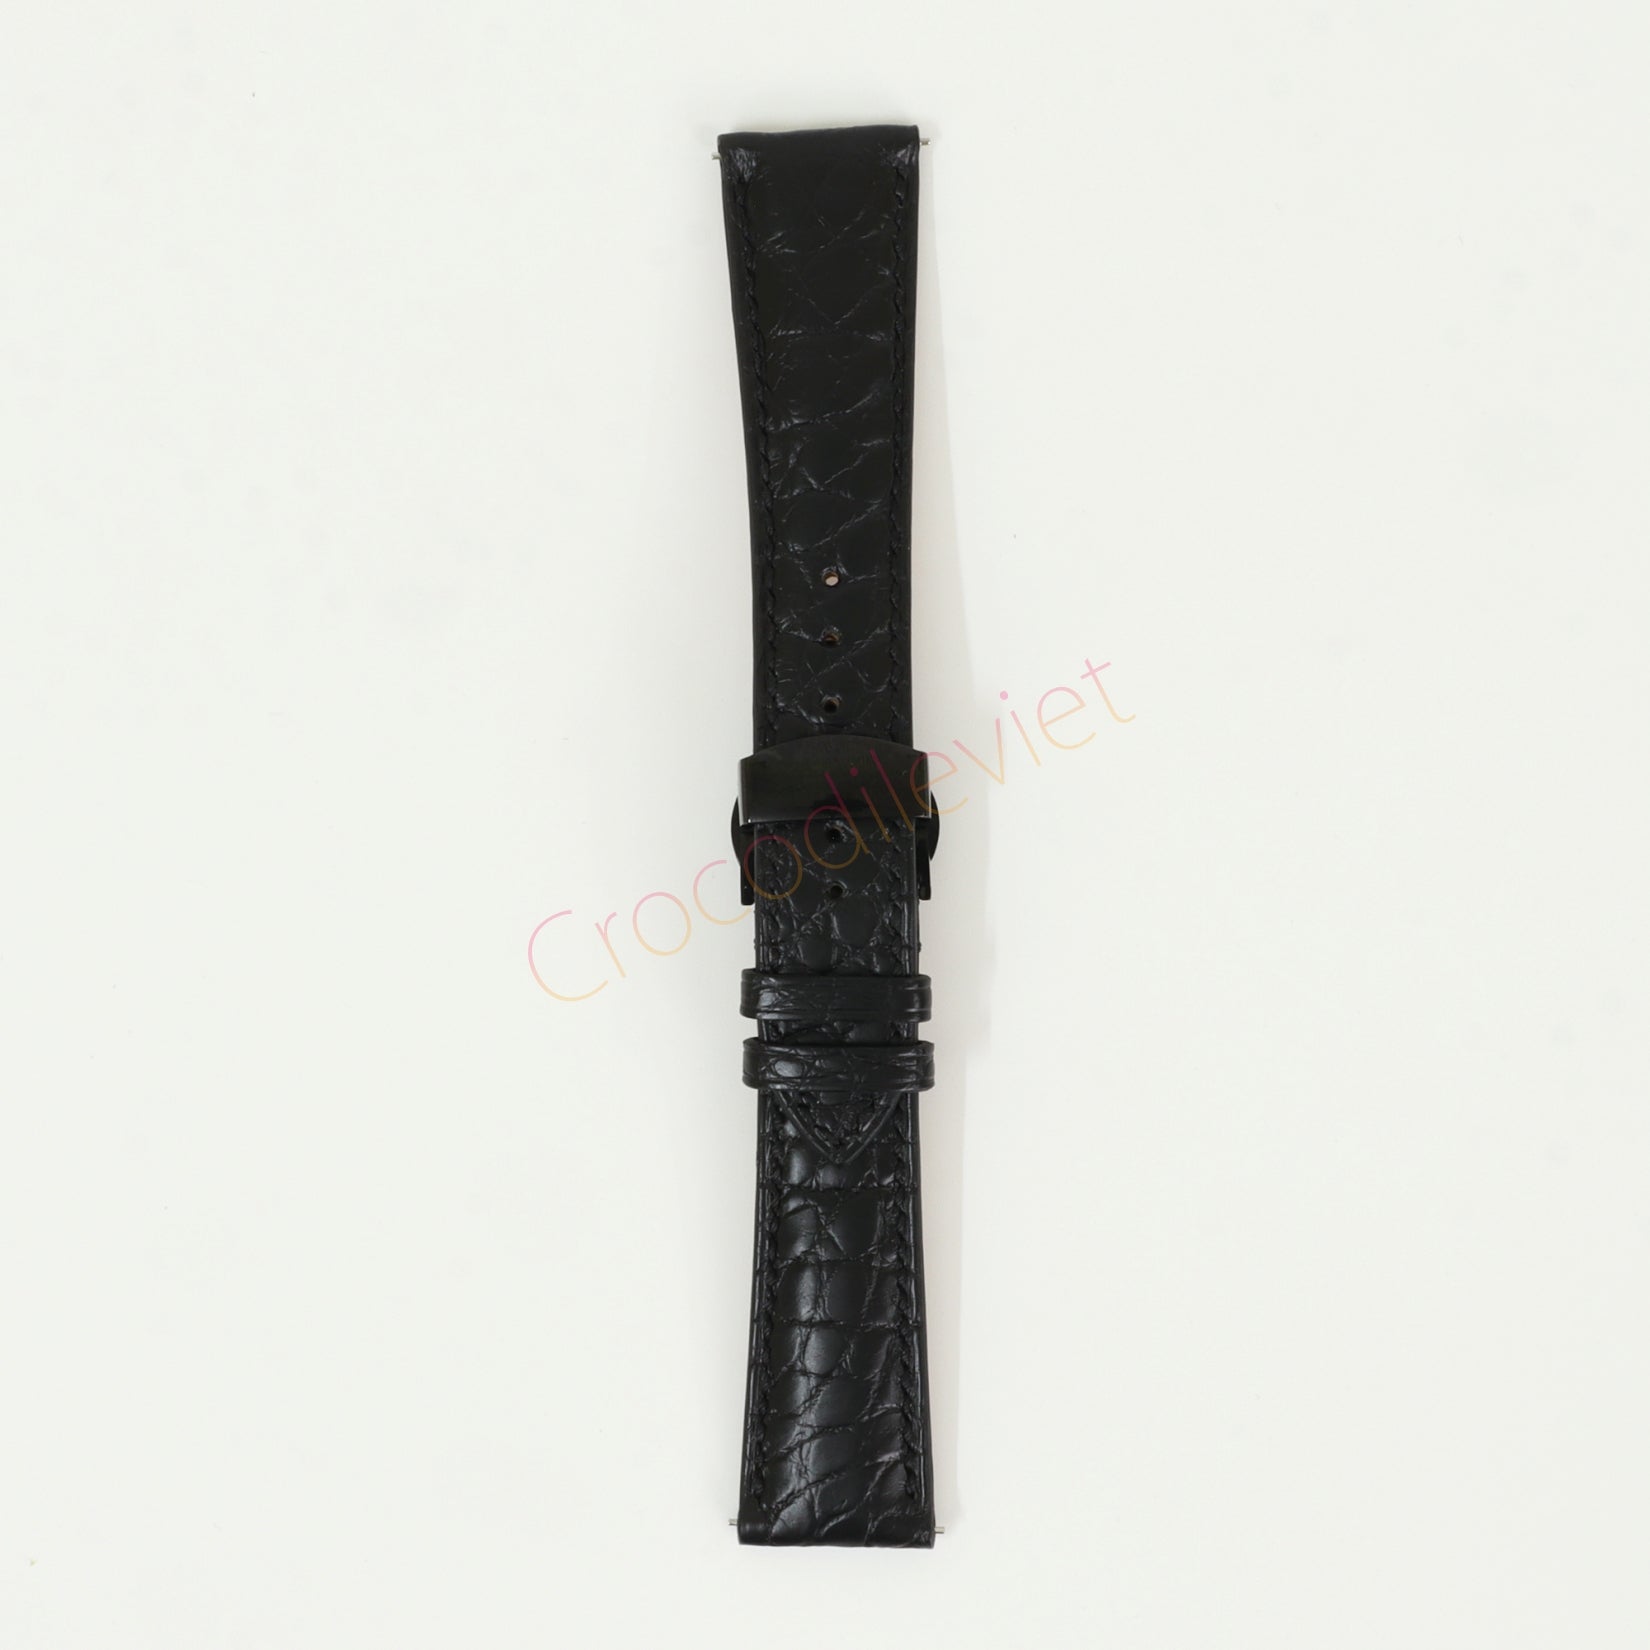 Black Genuine Alligator Leather Watch Straps With Deployant Clasp, Leather Watch Bands Quick Release Pins, Handmade Leather Watch Strap